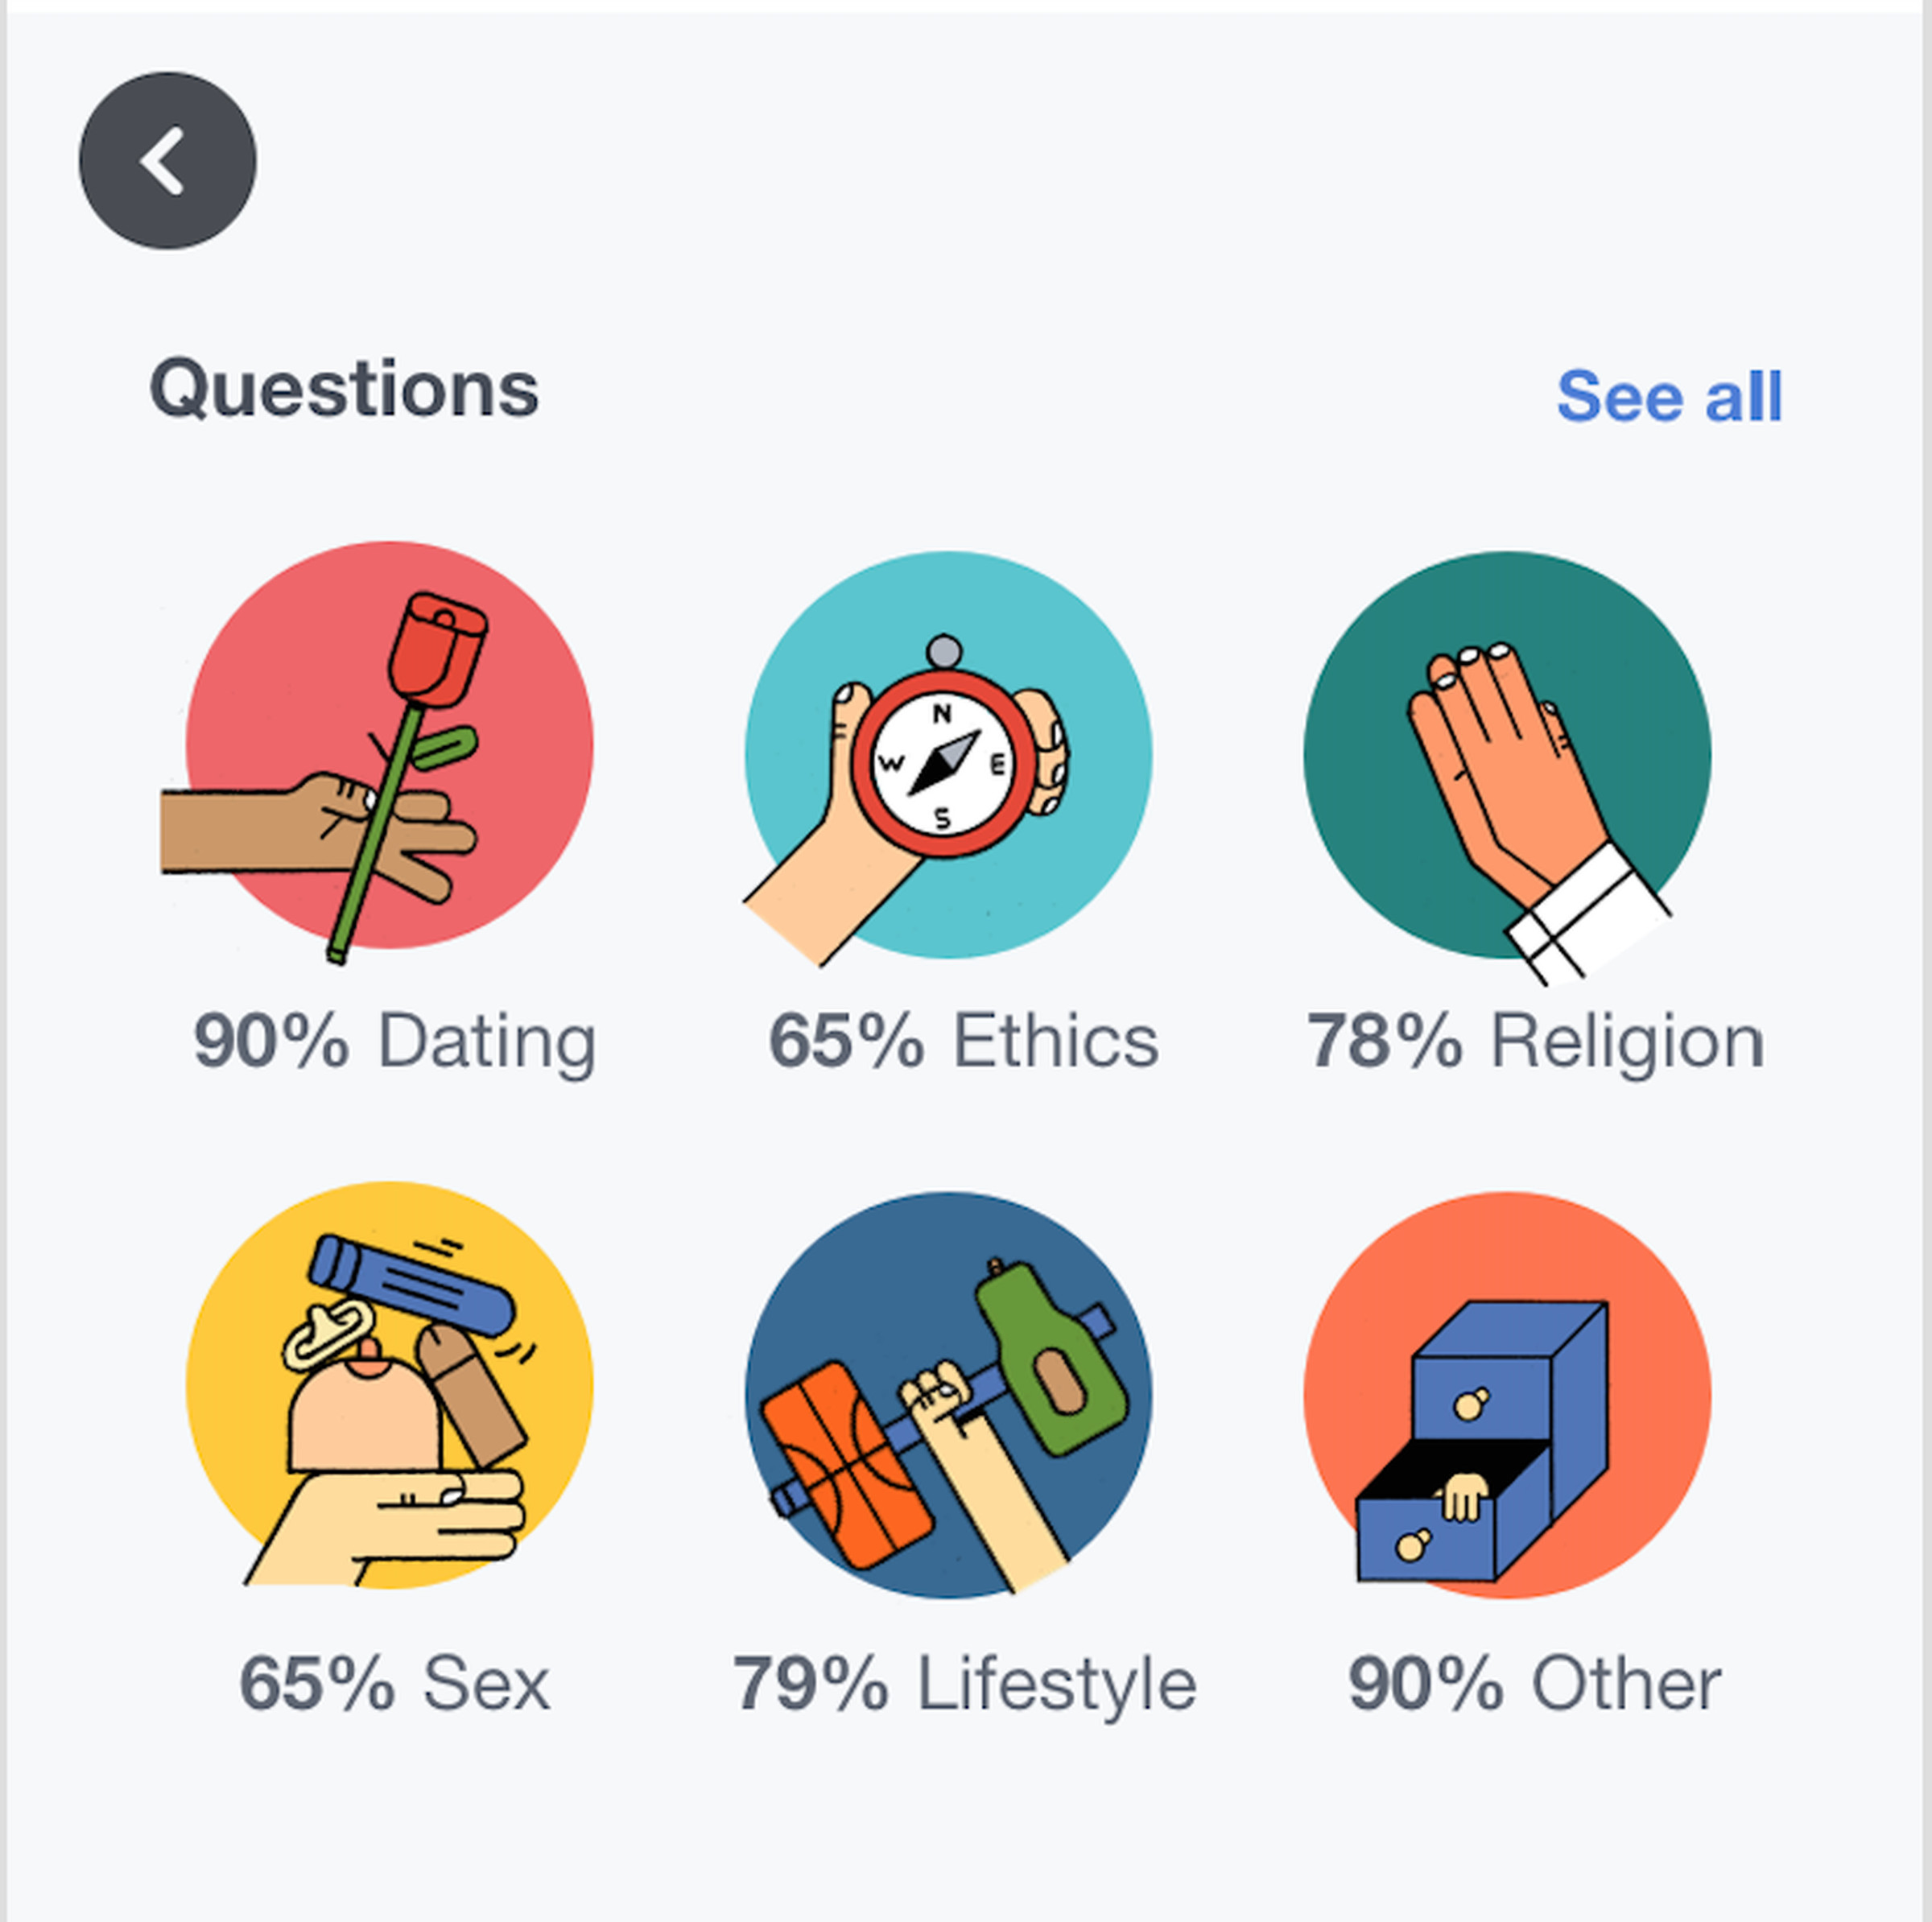 New question categories from OKCupid’s redesign.